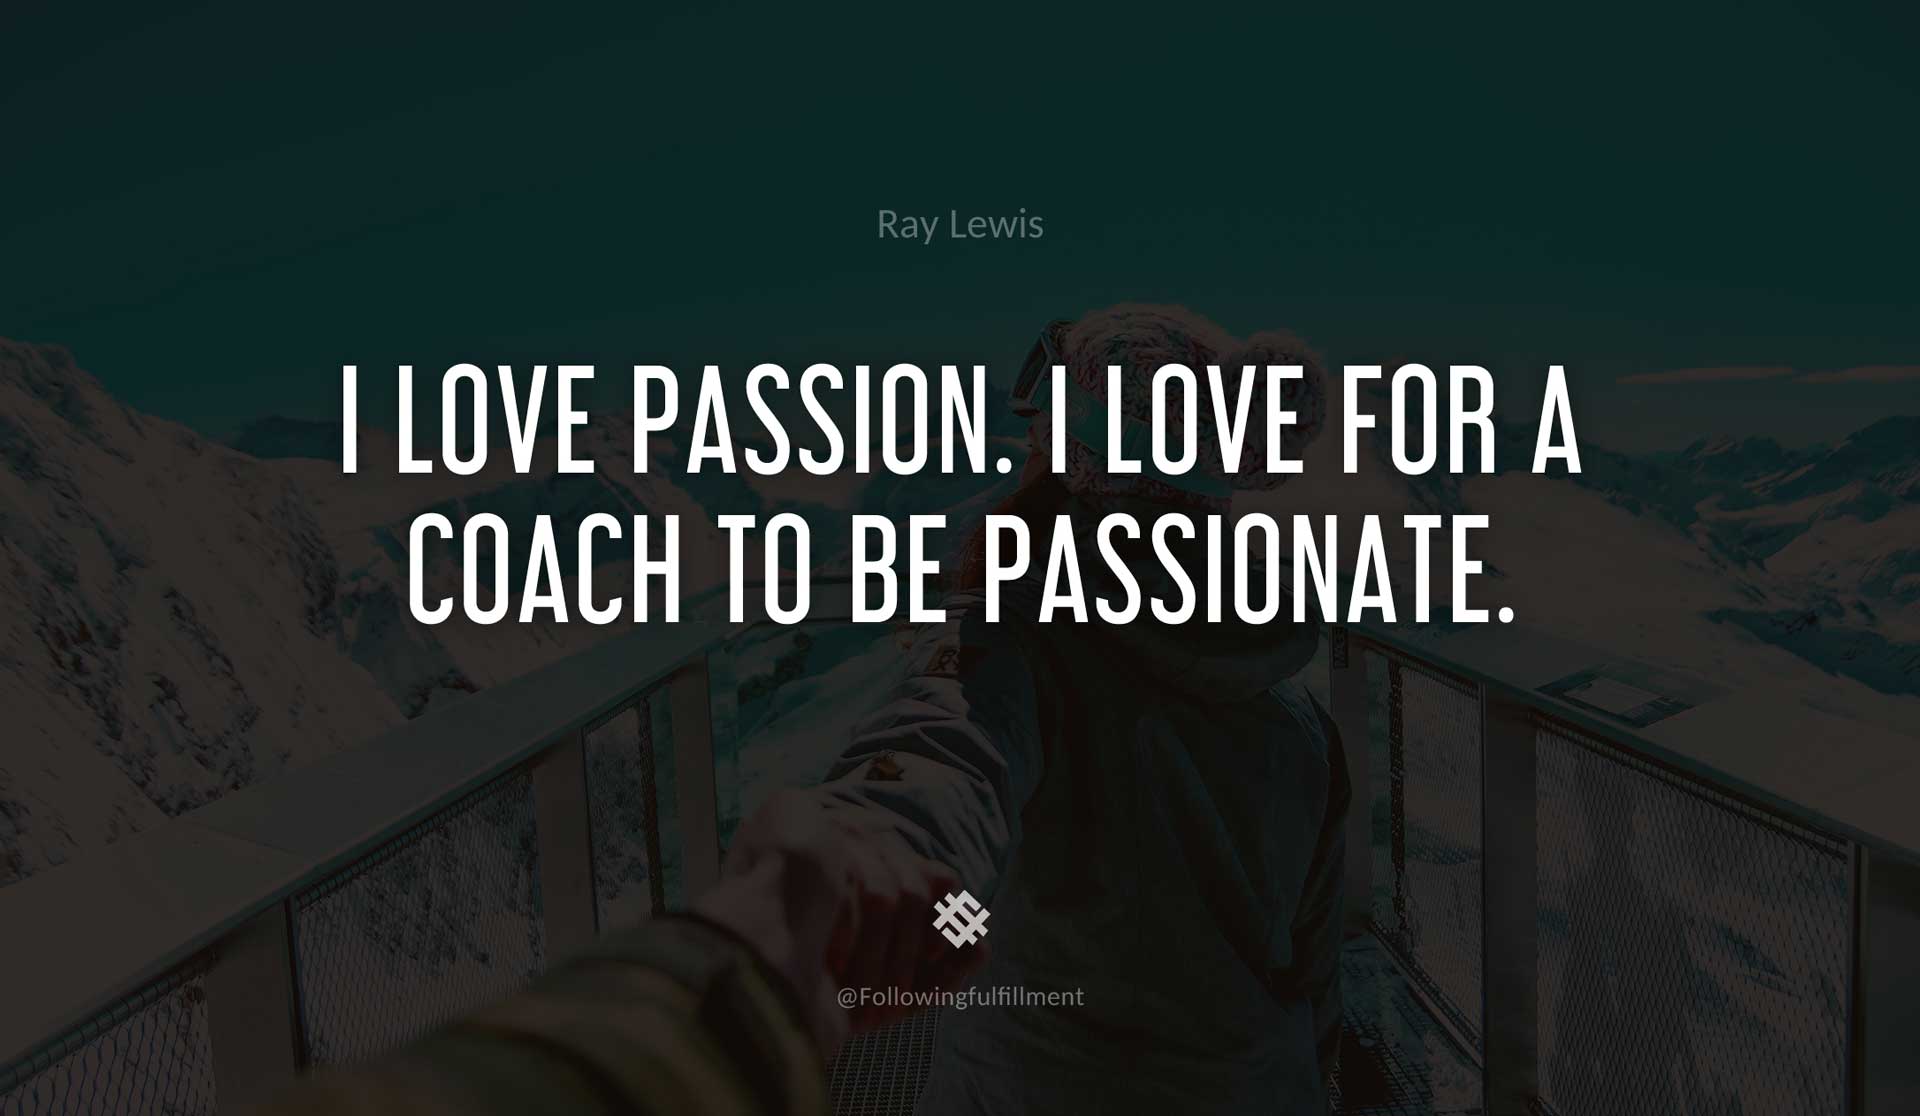 I-love-passion.-I-love-for-a-coach-to-be-passionate.-RAY-LEWIS-Quote.jpg